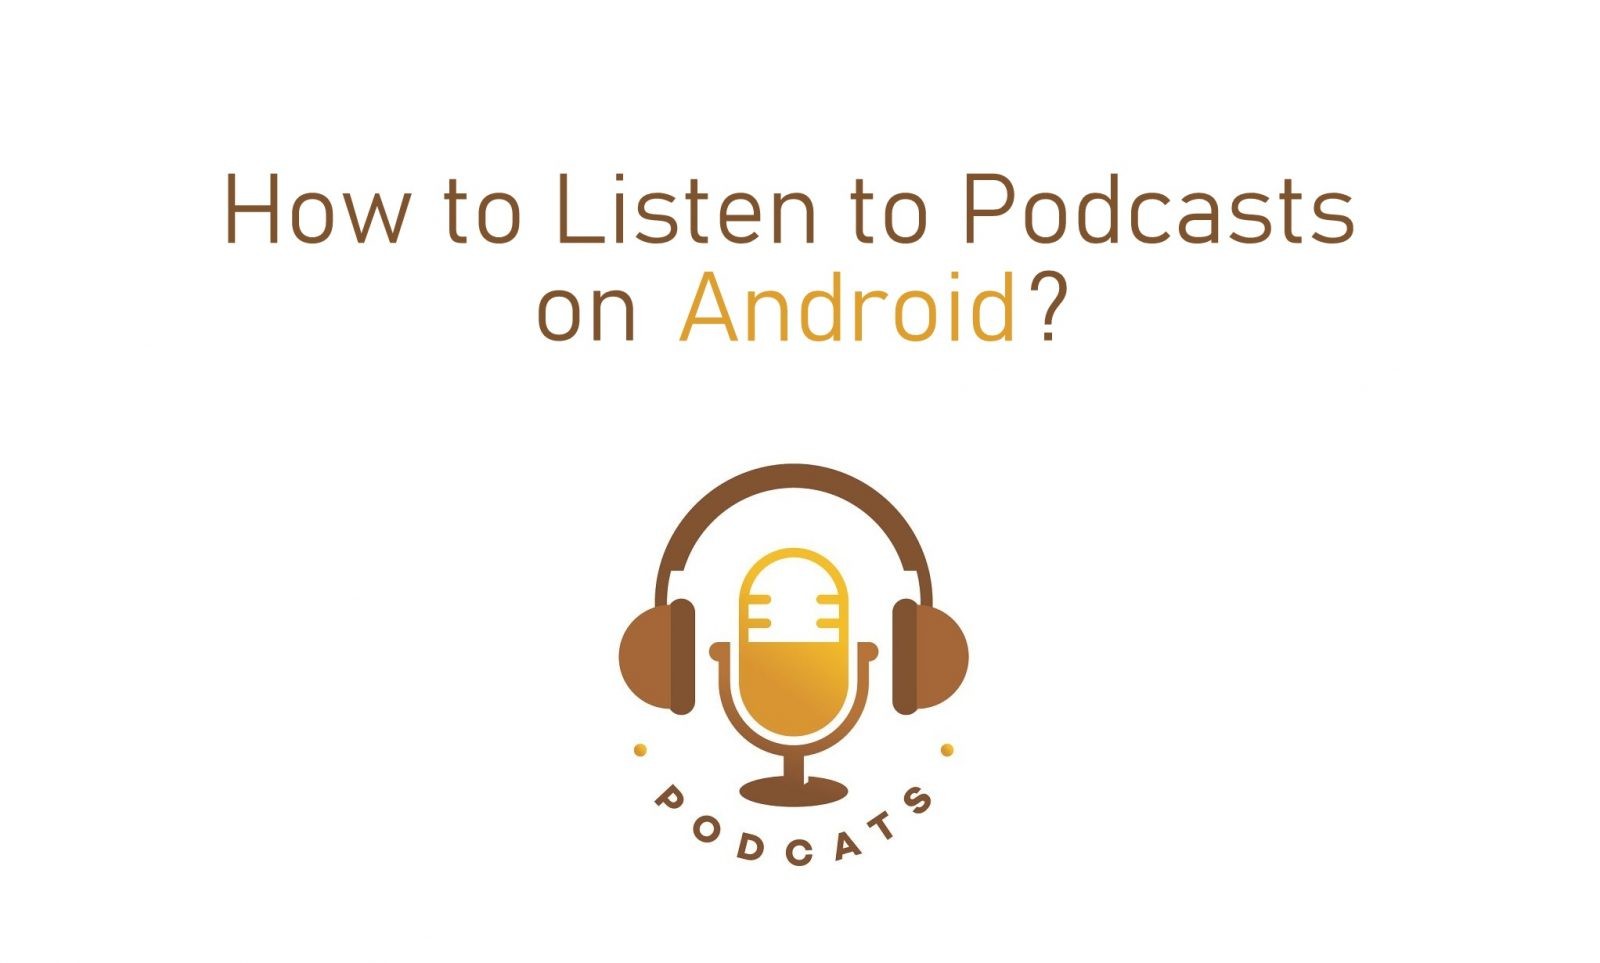 How to Listen to Podcasts on Android?